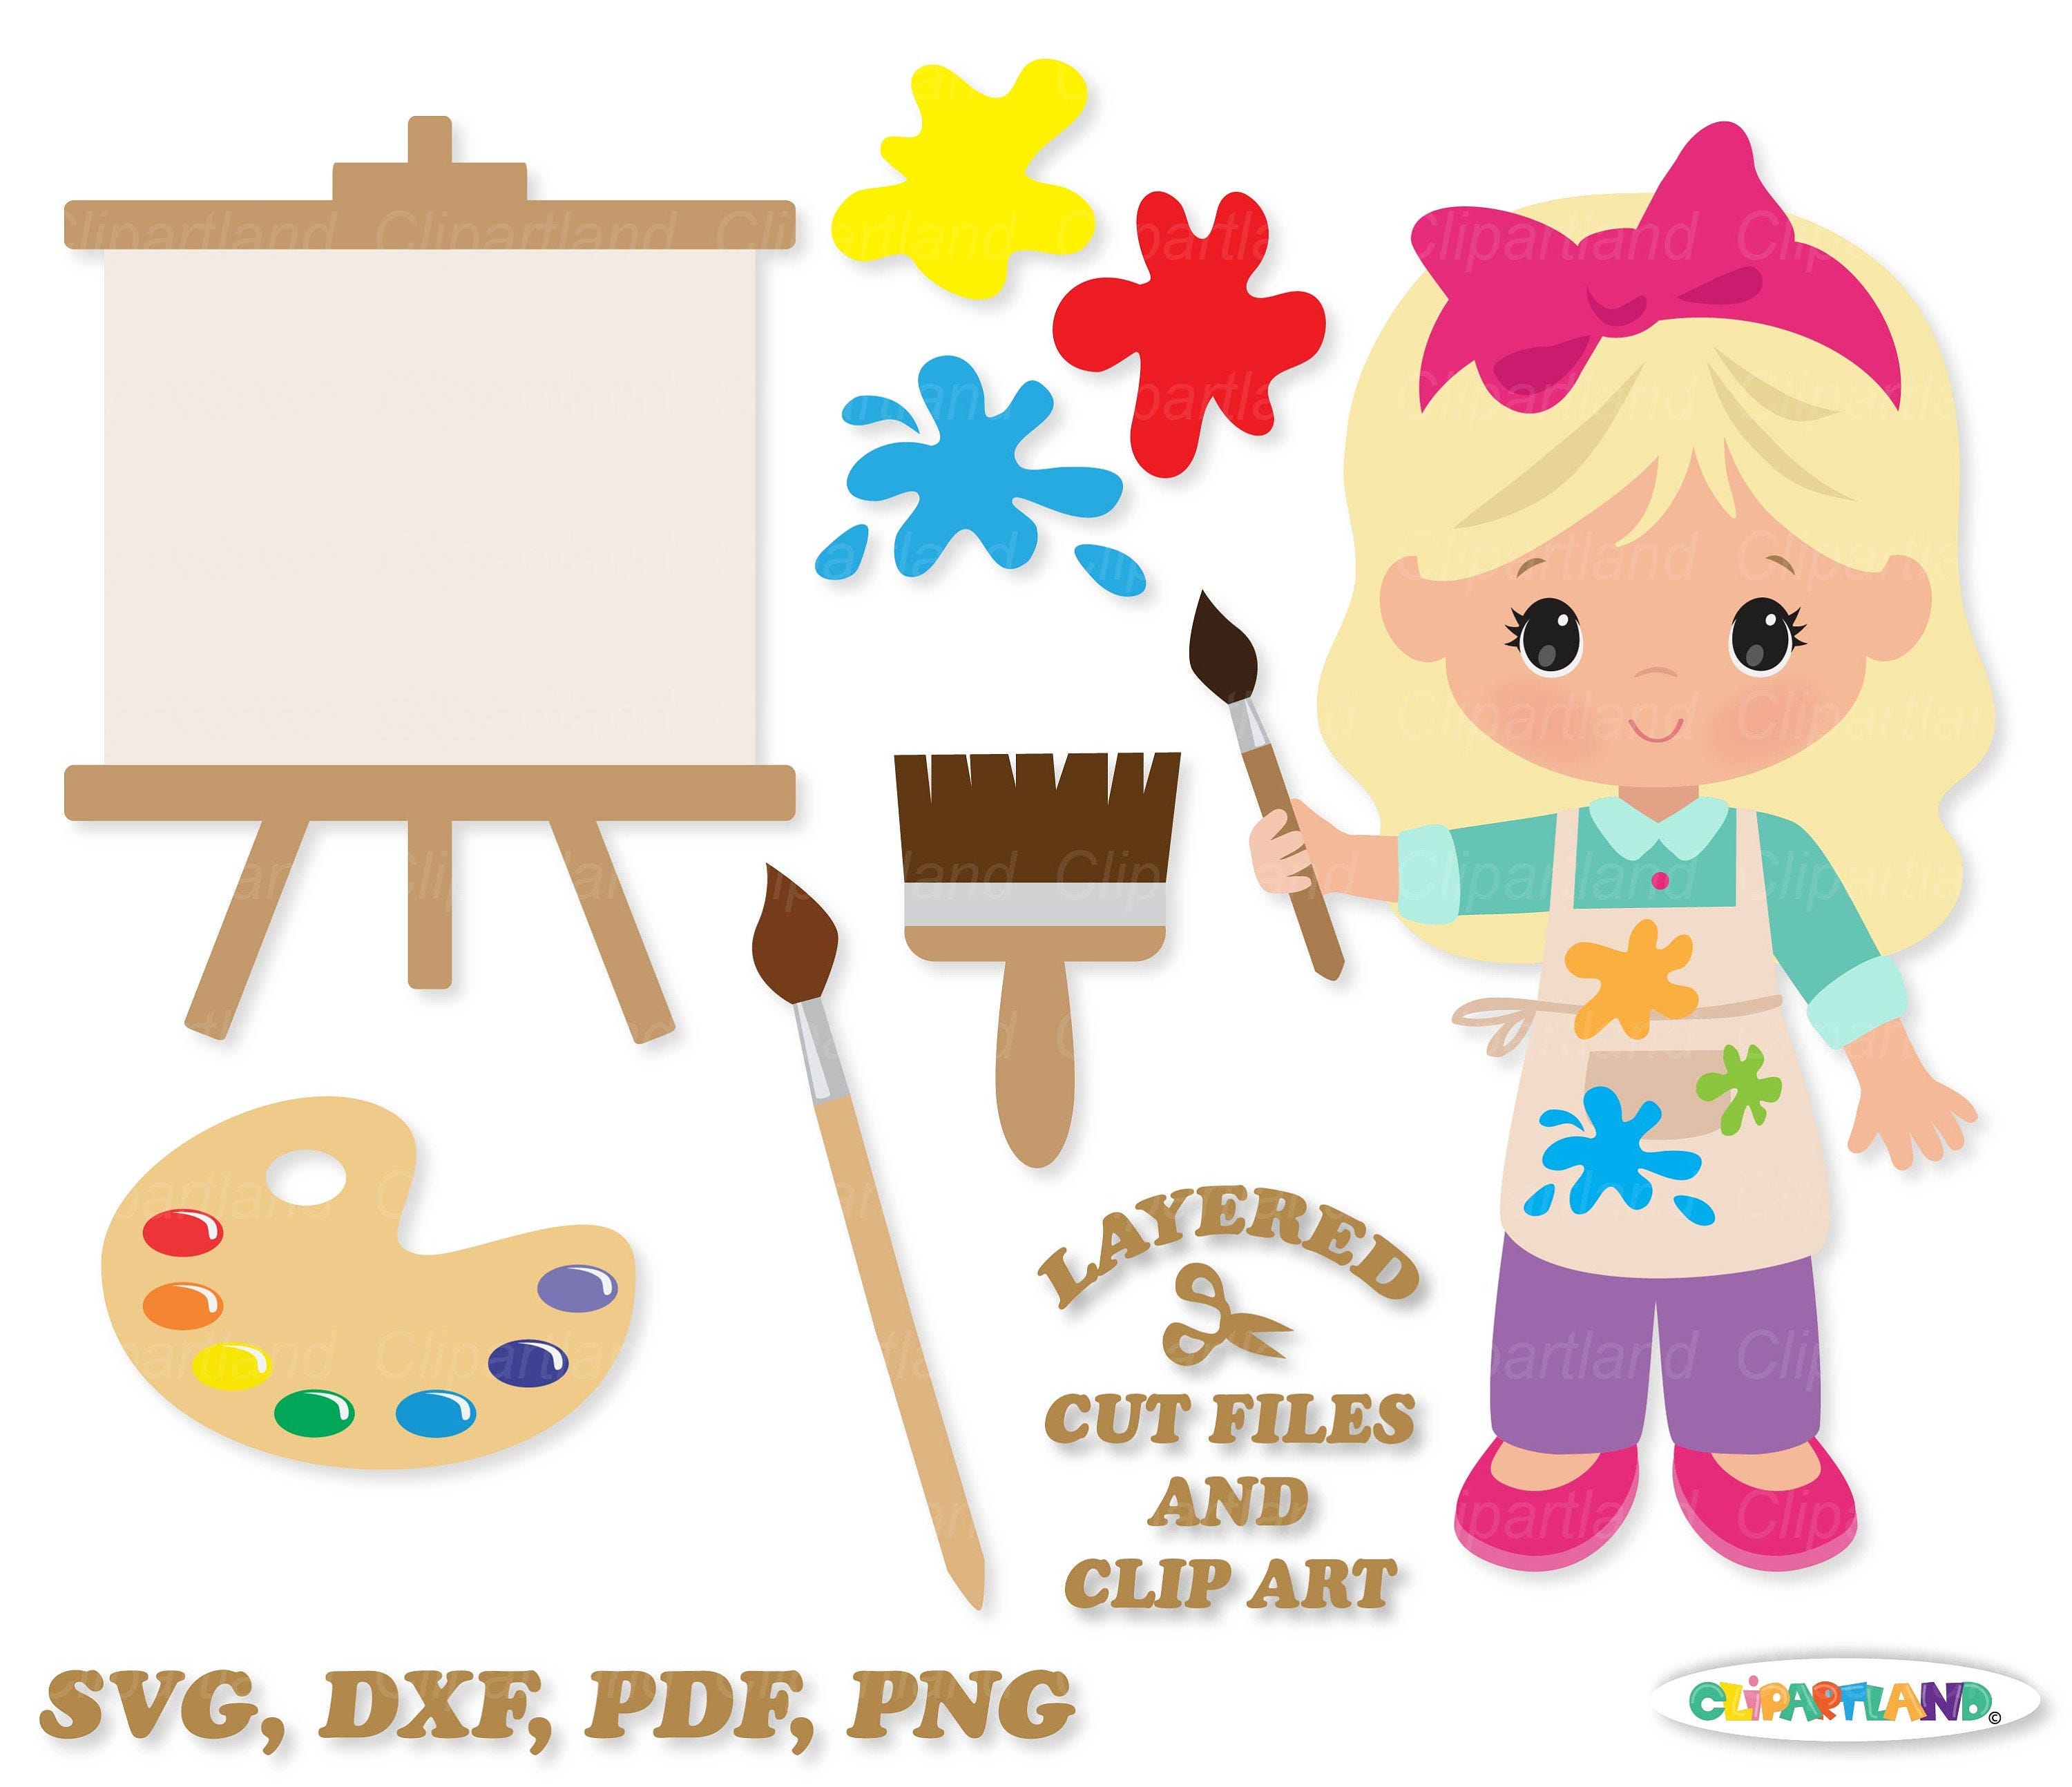 NSTANT Download. Cute girl artist svg cut file and clip art. Commercial license is included! P_1.